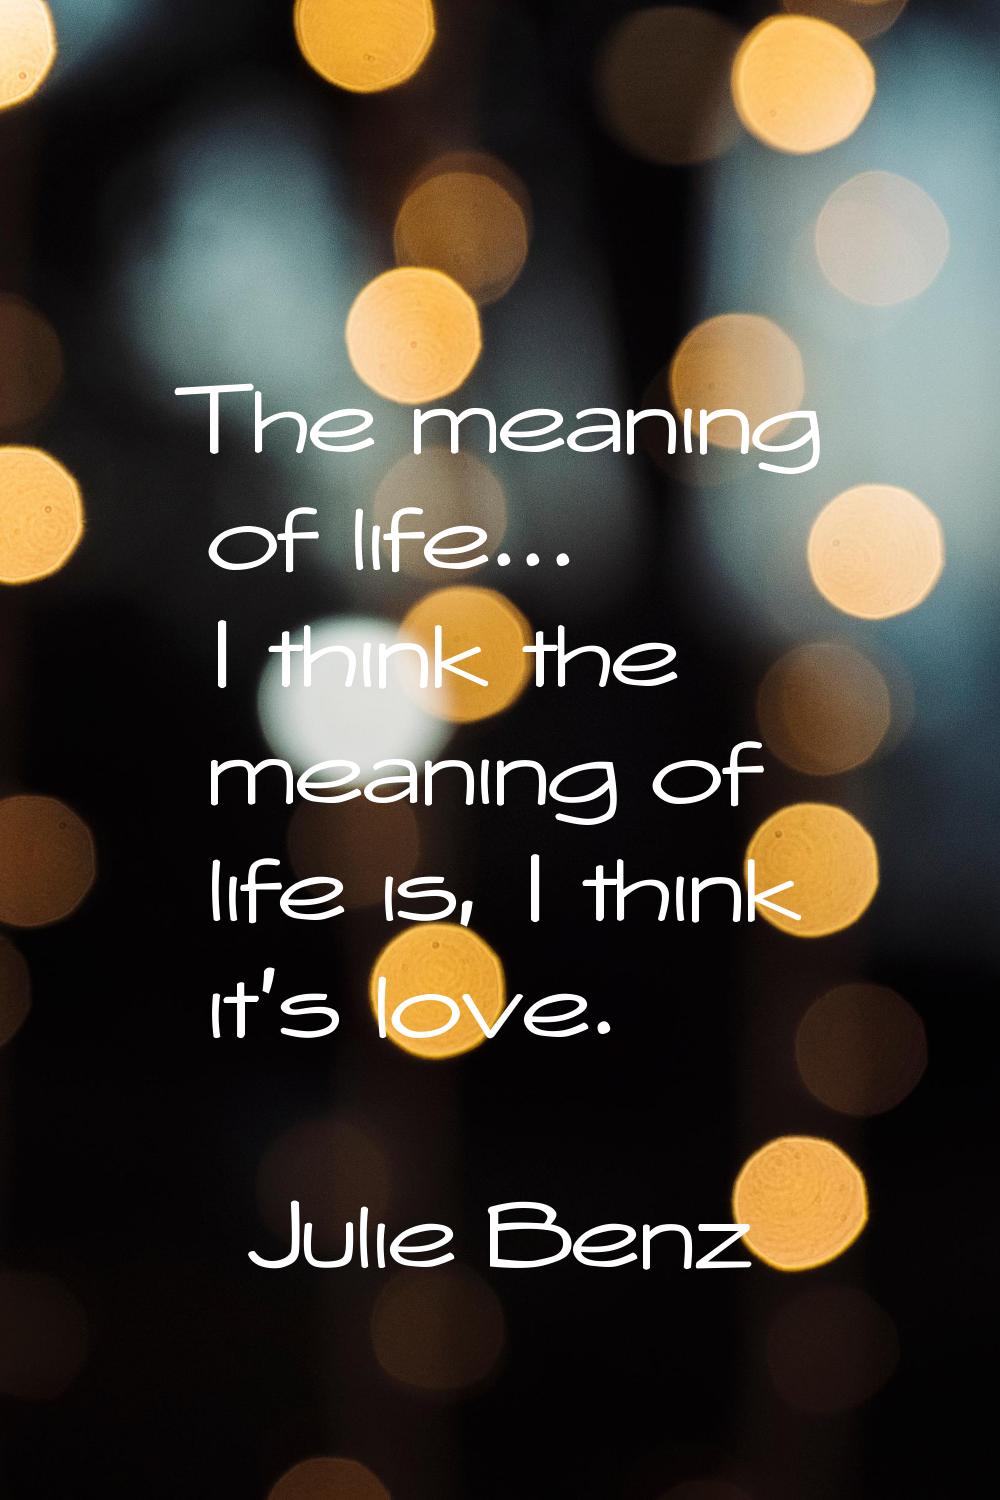 The meaning of life... I think the meaning of life is, I think it's love.